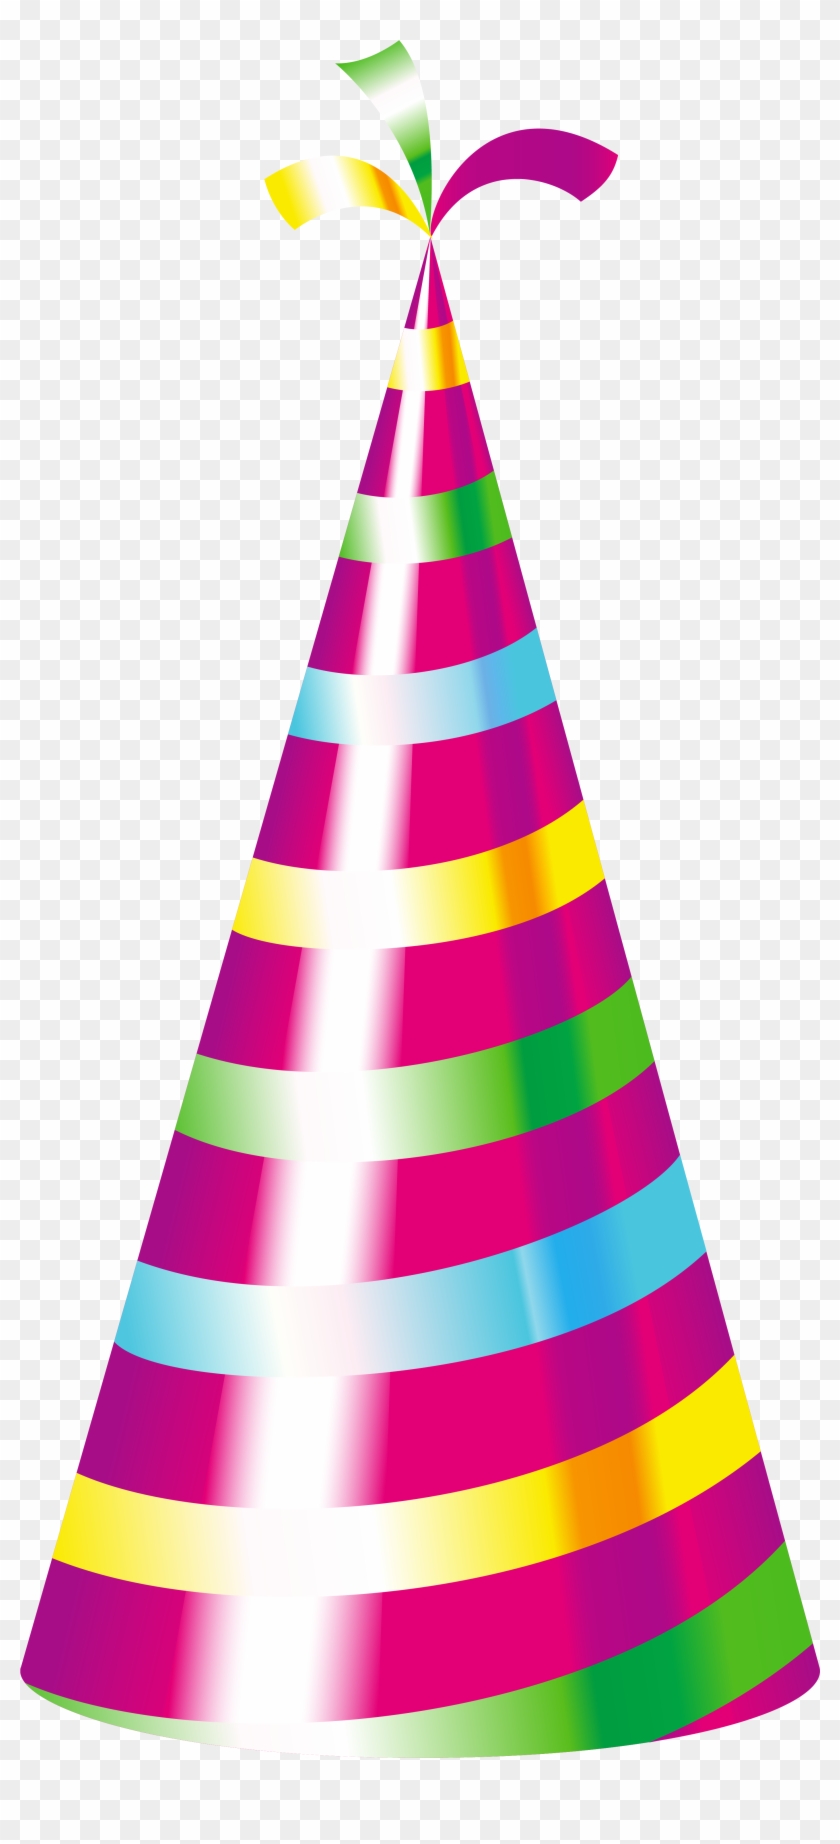 Party Hat Png Clipart Image - Party Hat #245482